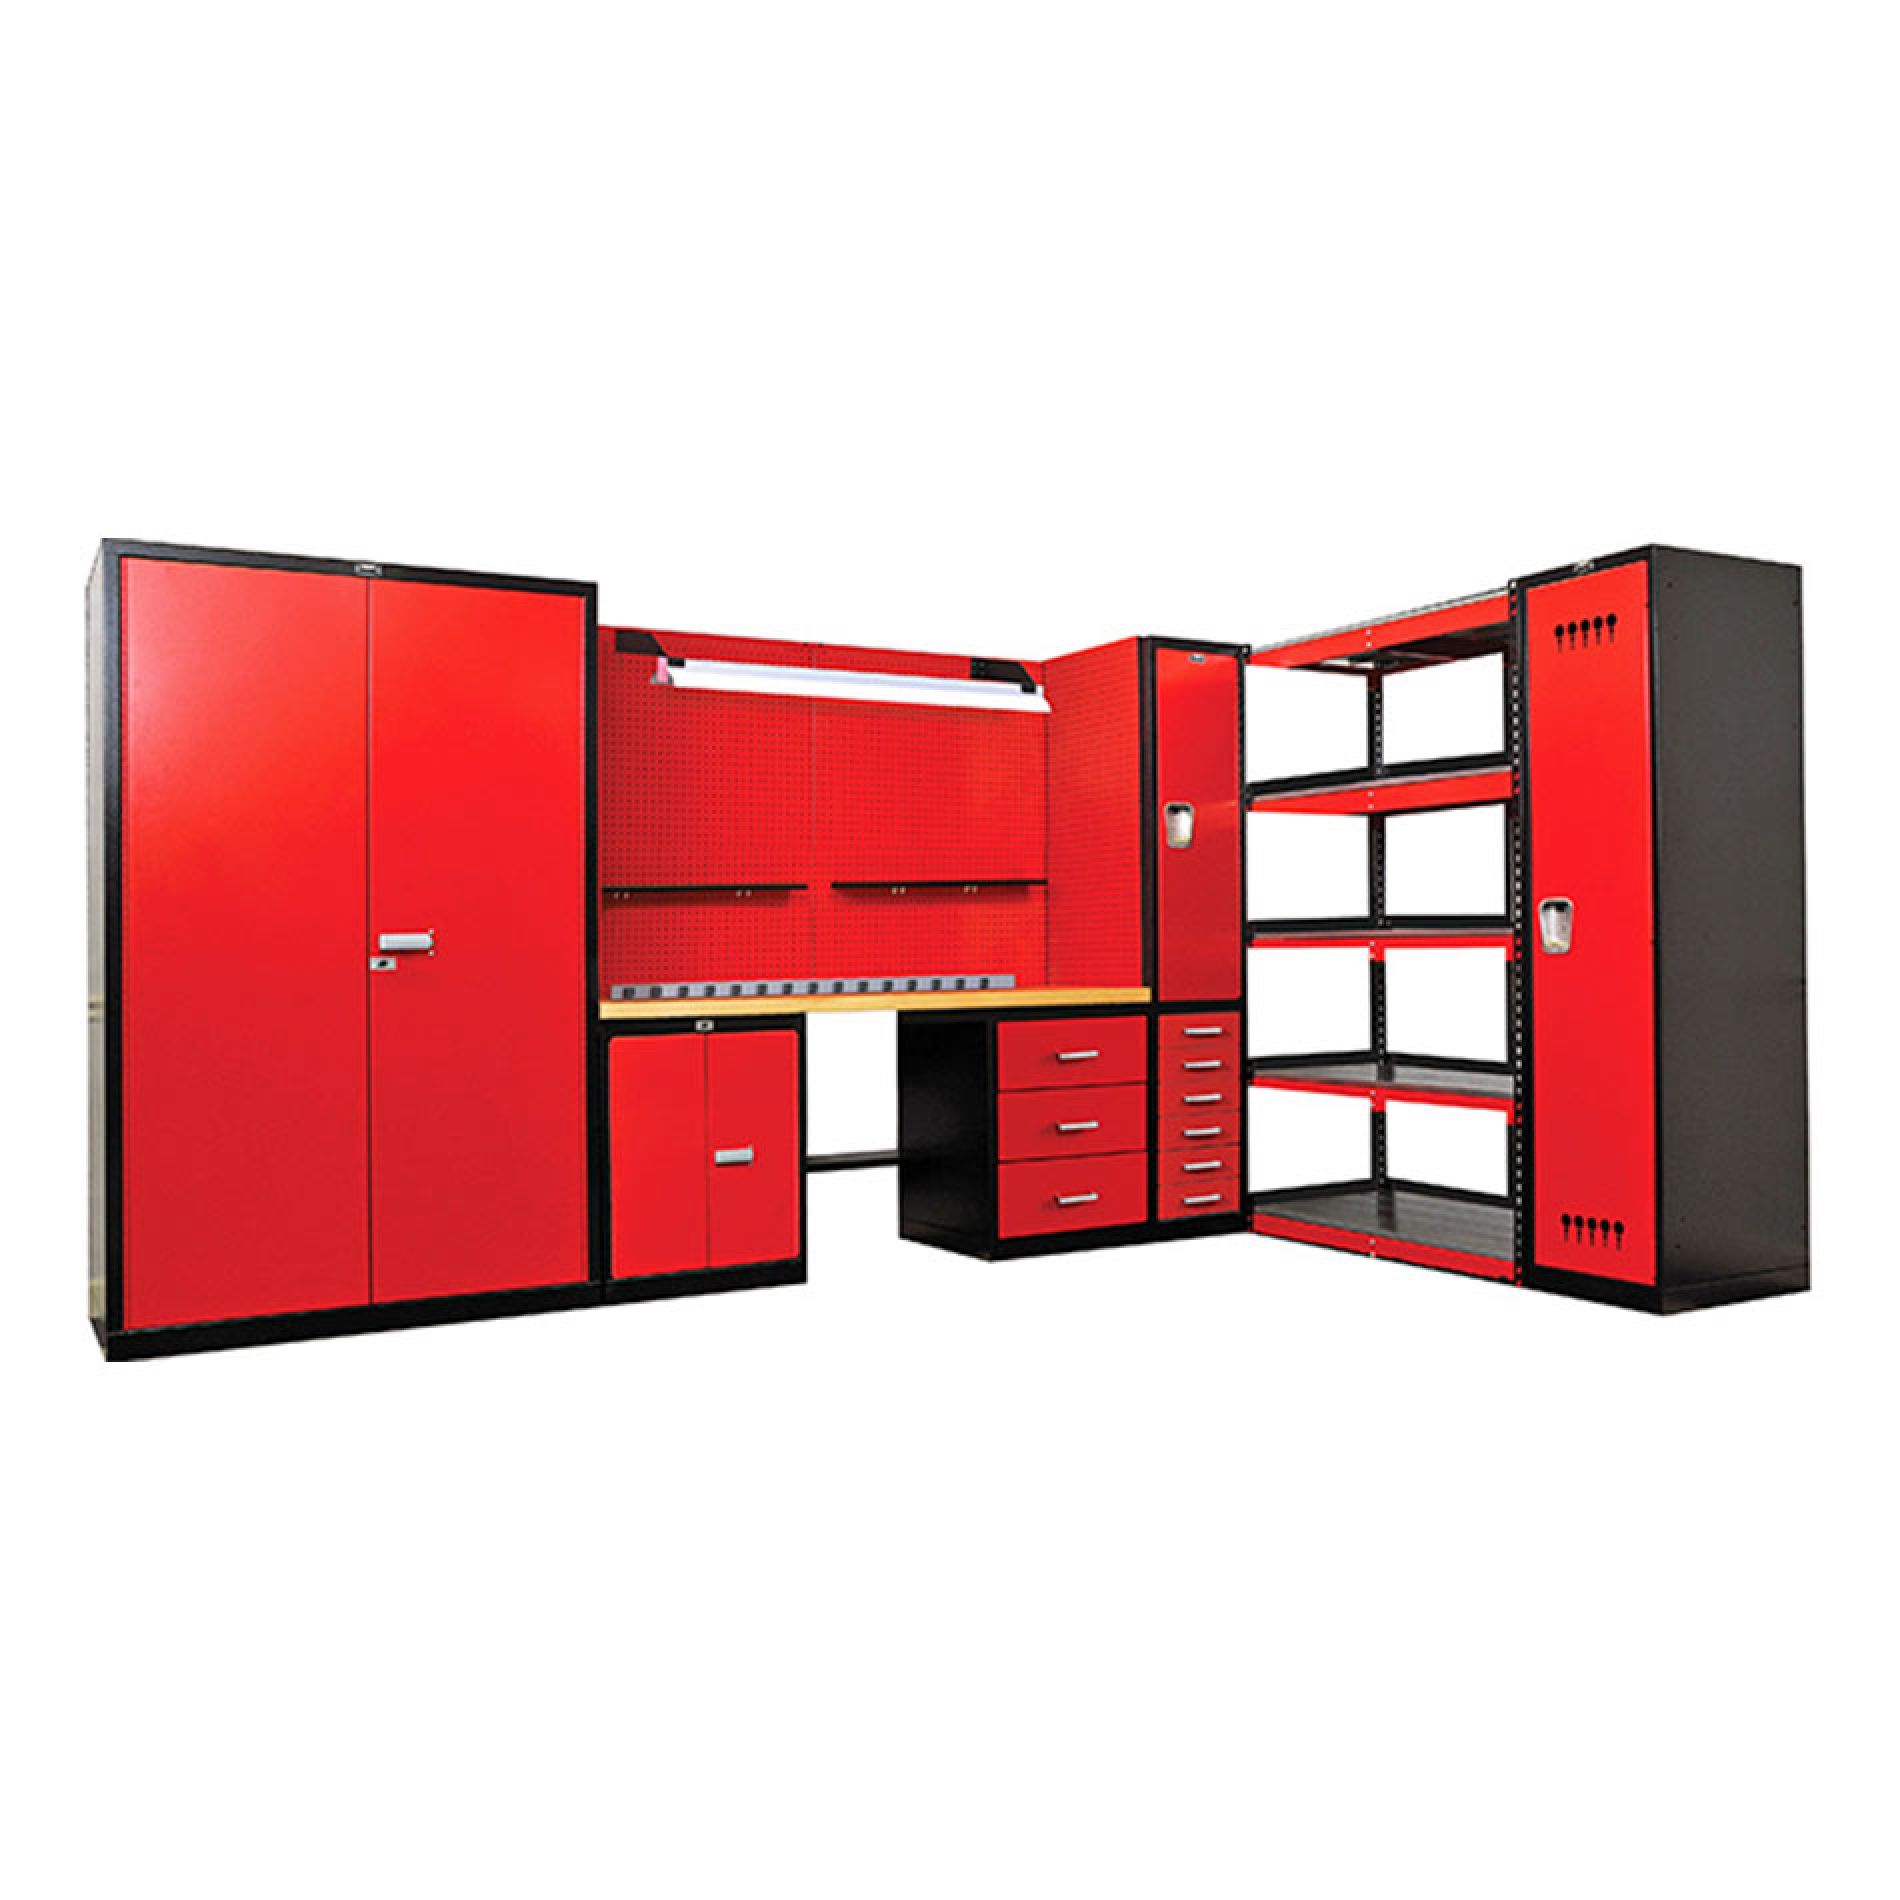 DuraTough All-Welded Steel Cabinets Gallery Image